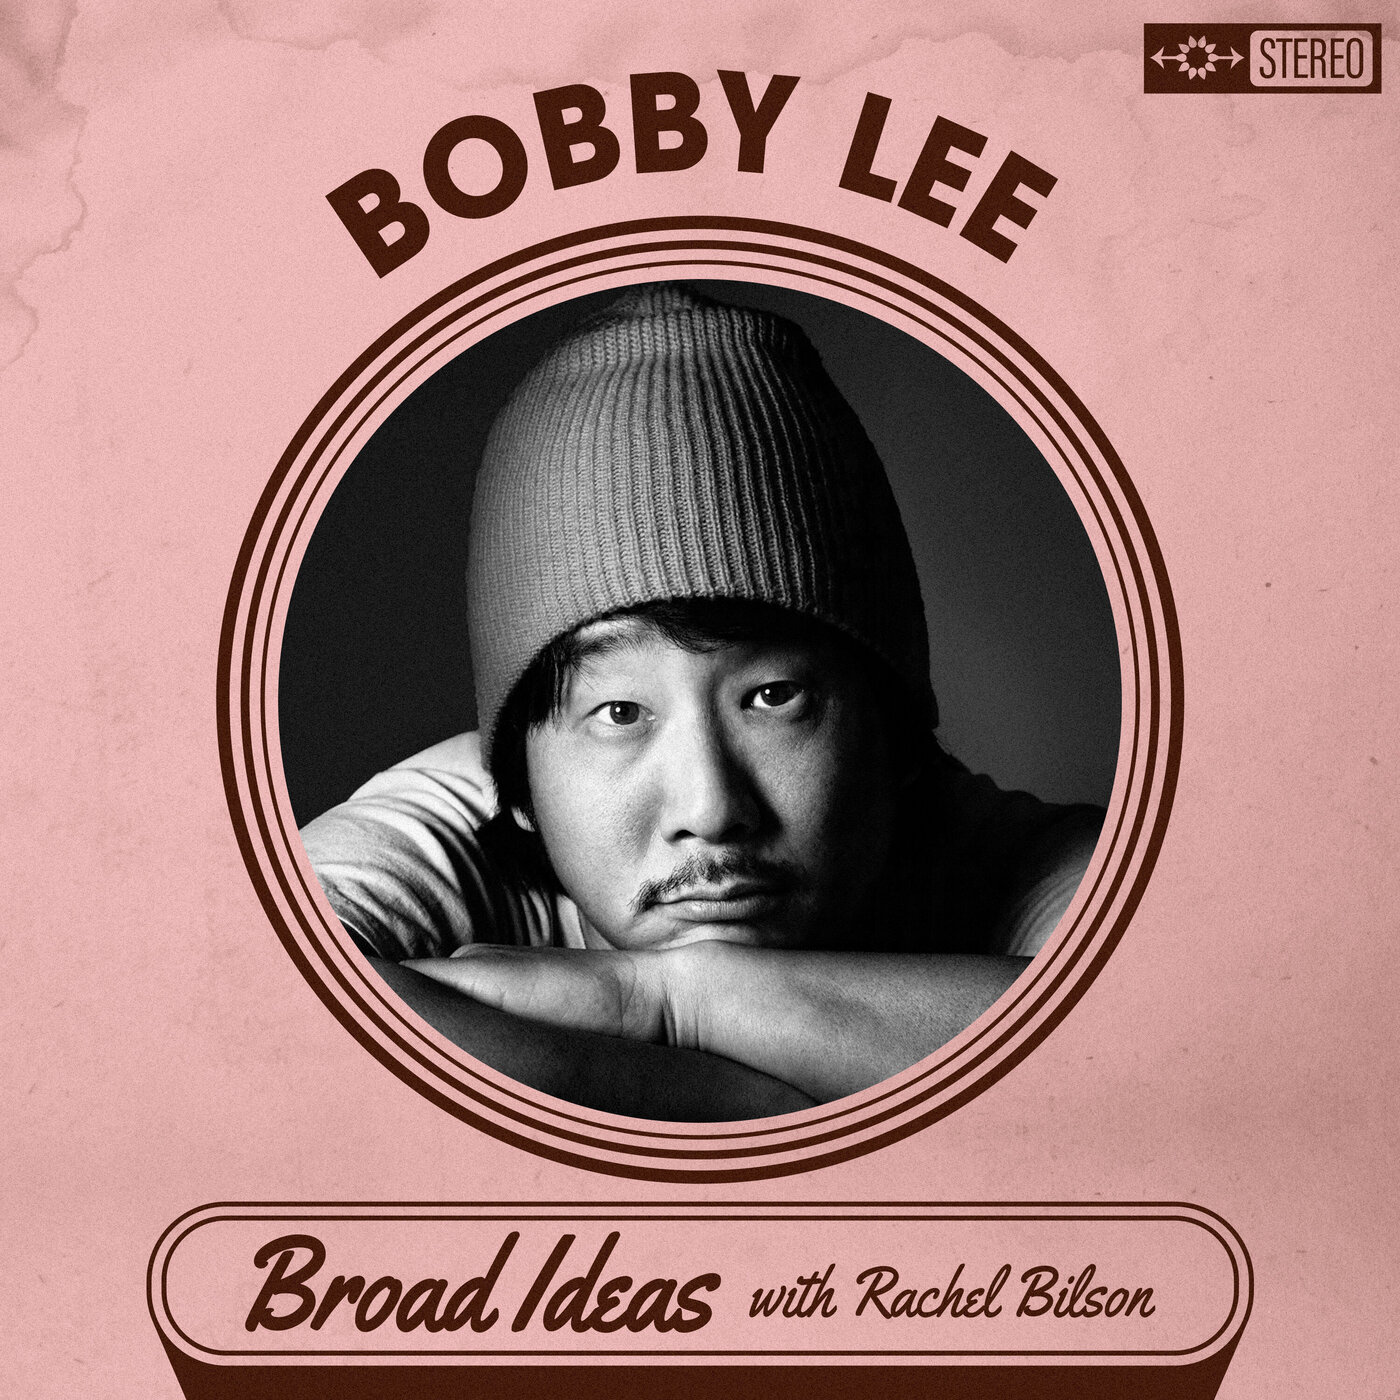 108 of Bobby Lee Podcasts Interviews | Updated Daily - OwlTail